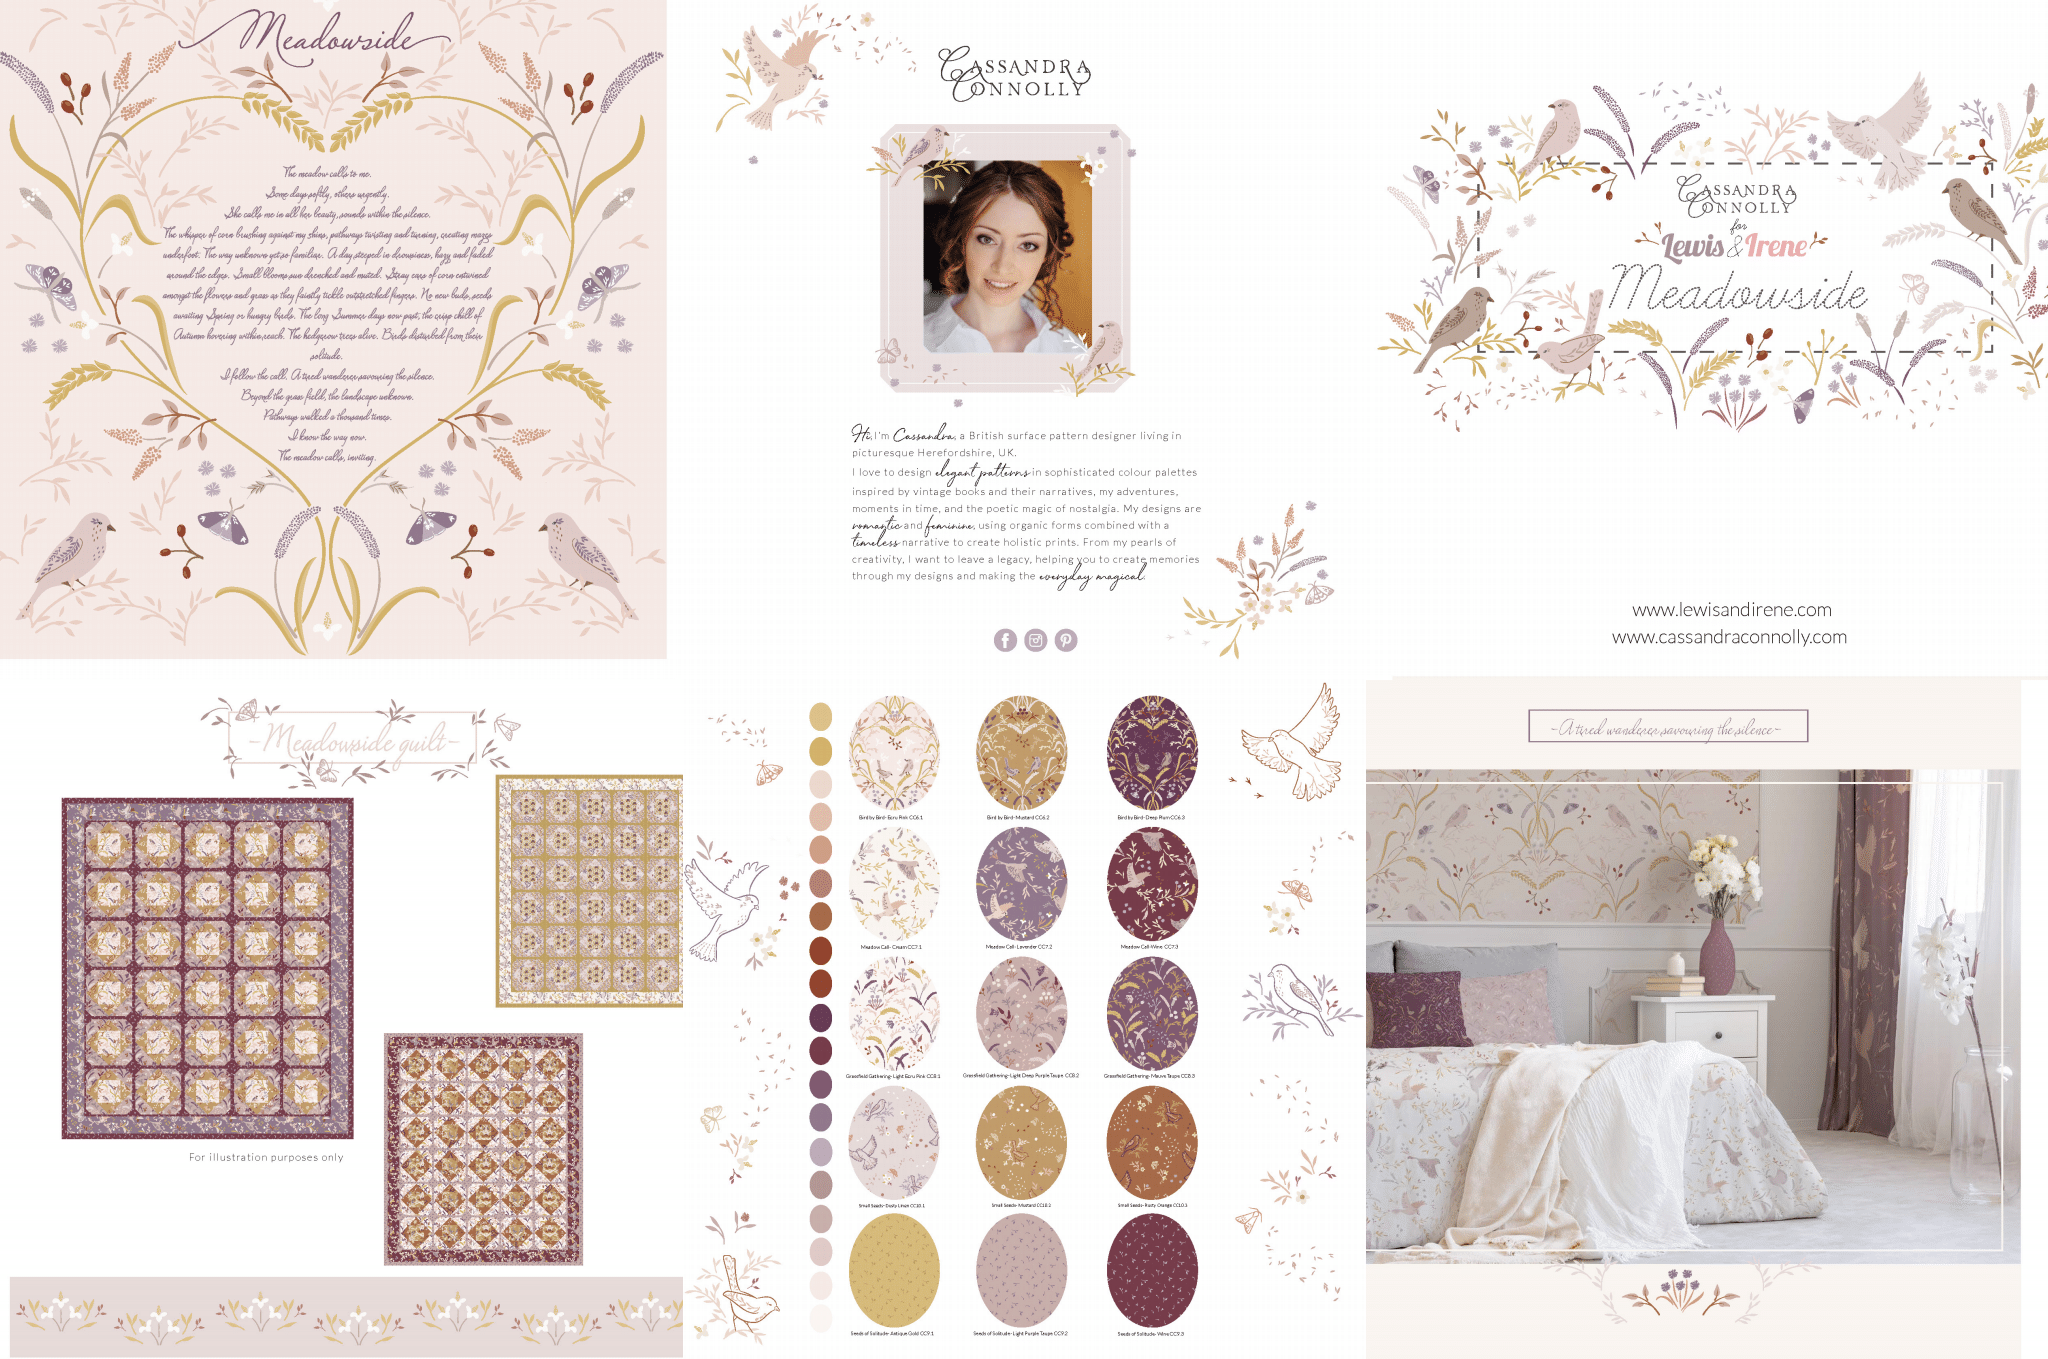 Seeds on Light Purple cotton fabric - Meadowside by Lewis & Irene